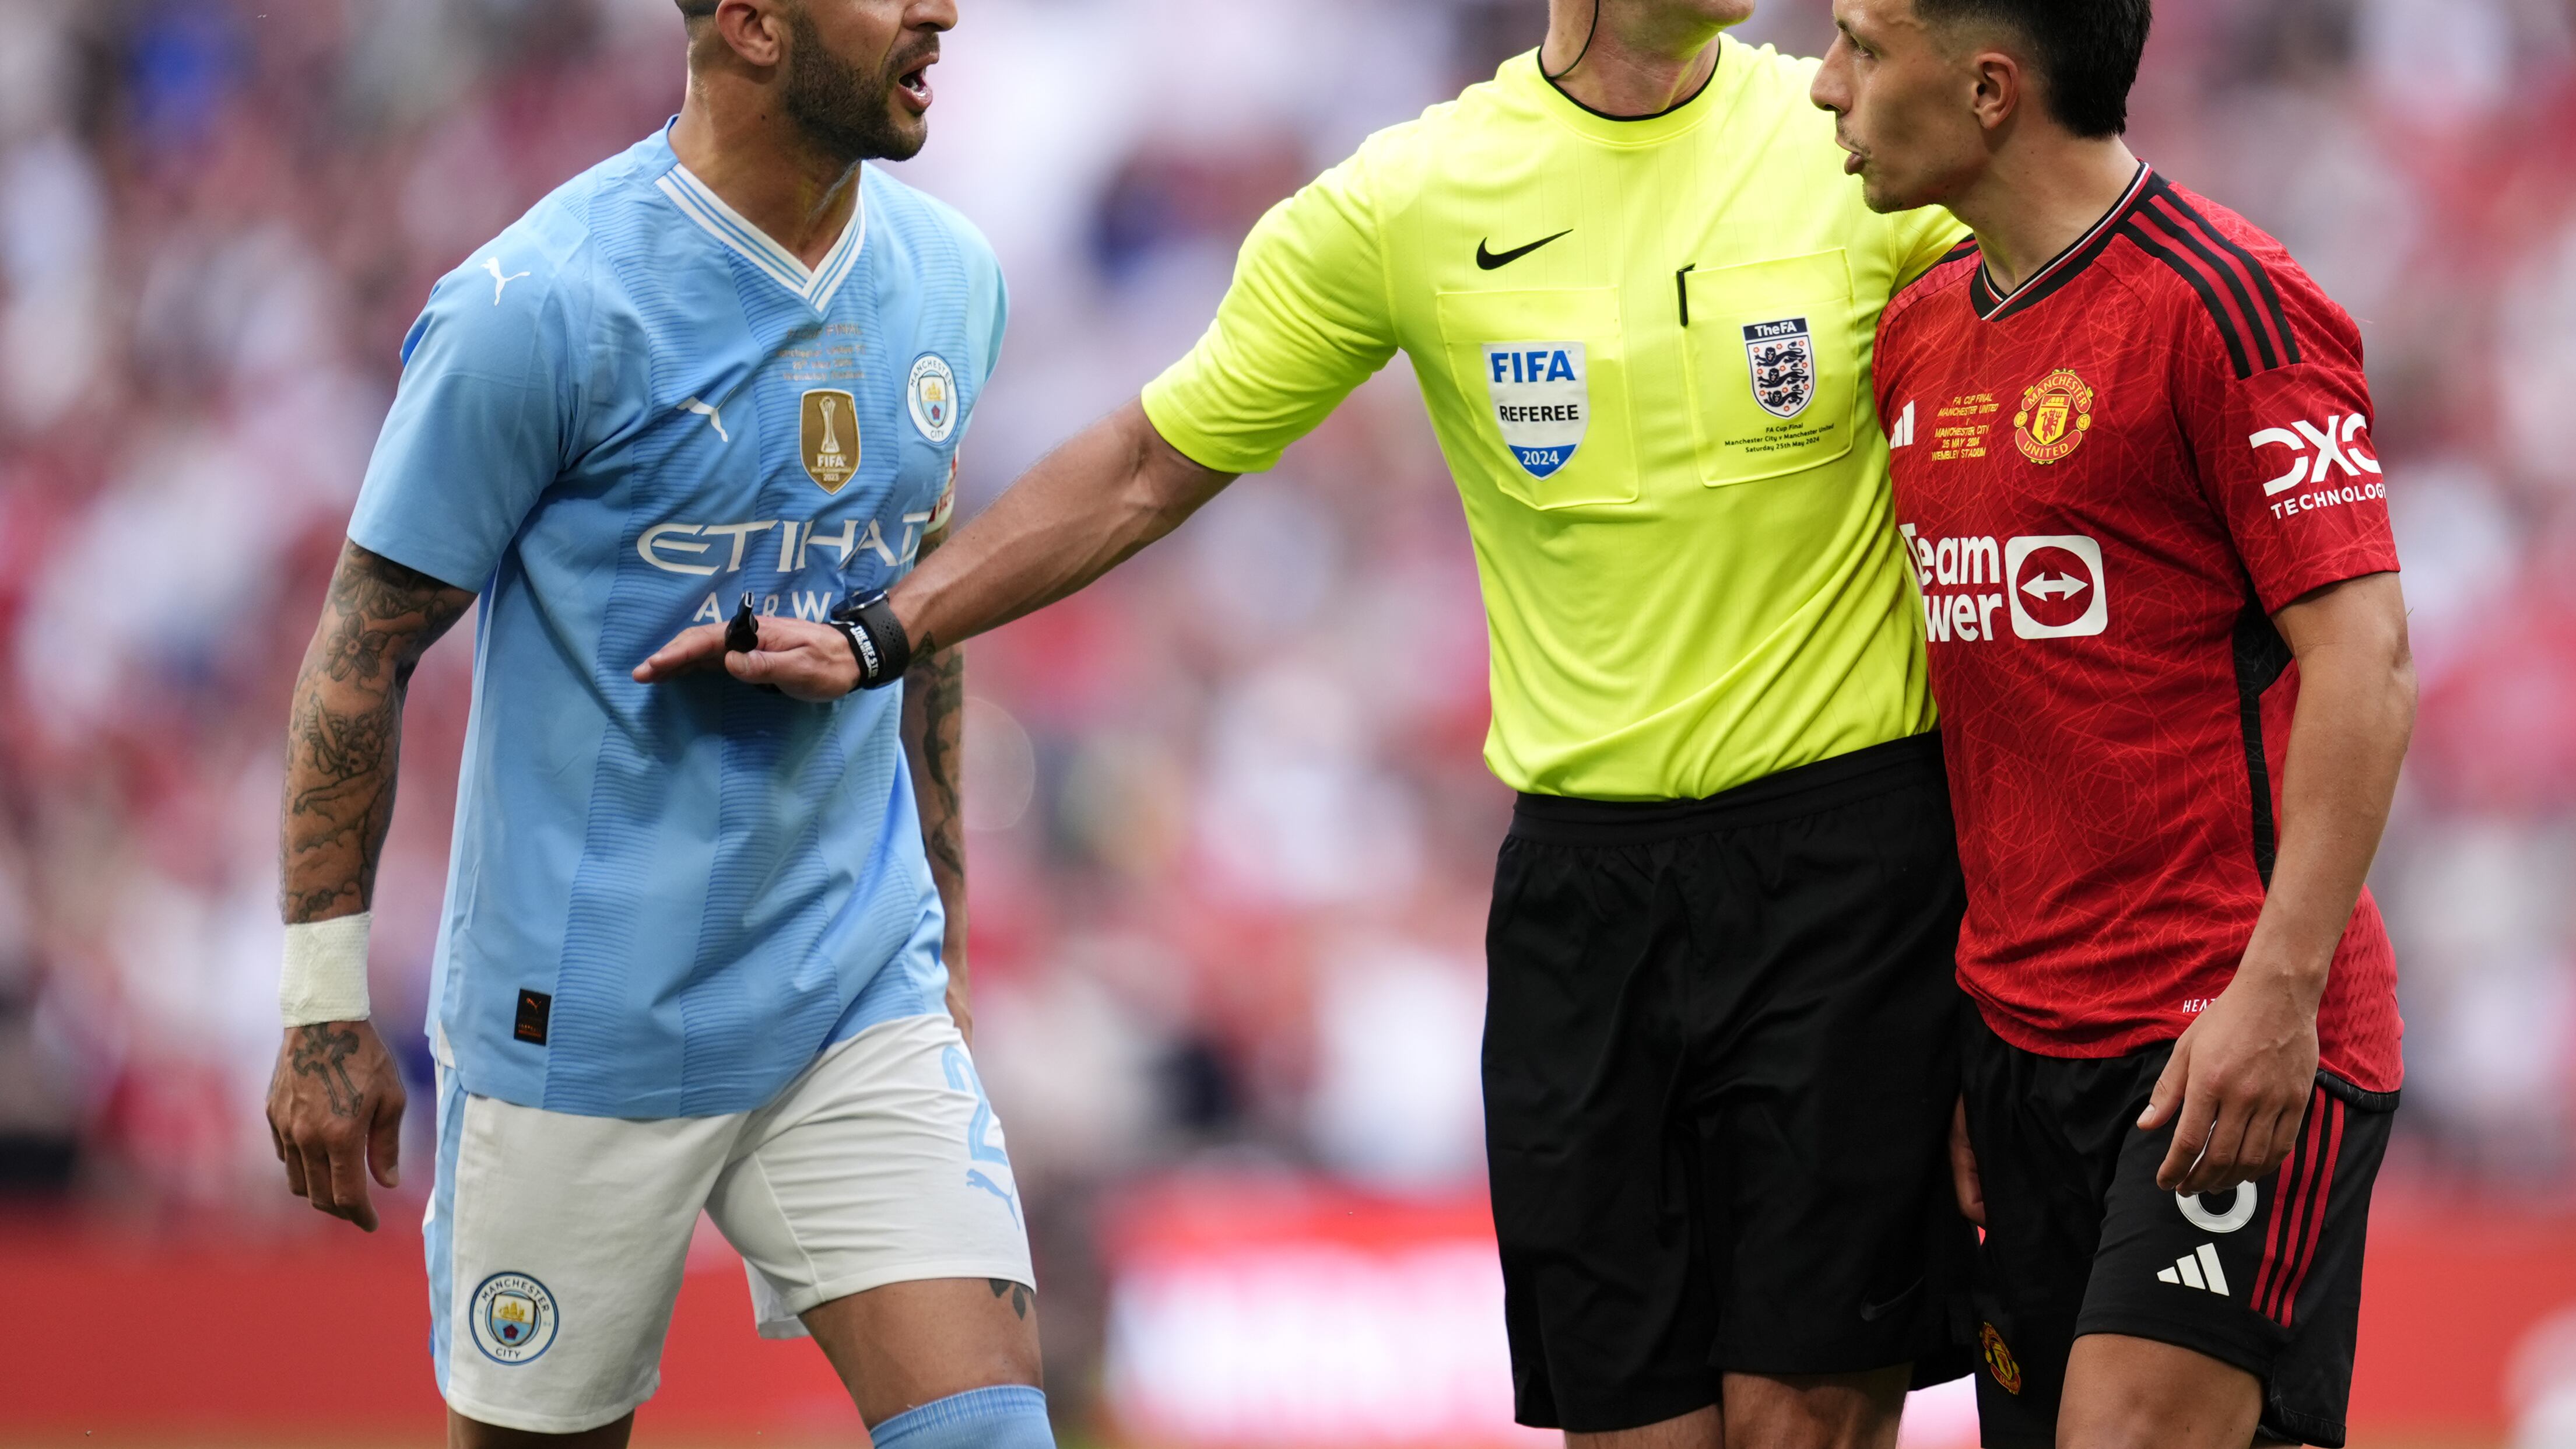 Kyle Walker (left) was frustrated as Manchester City were beaten in the FA Cup final